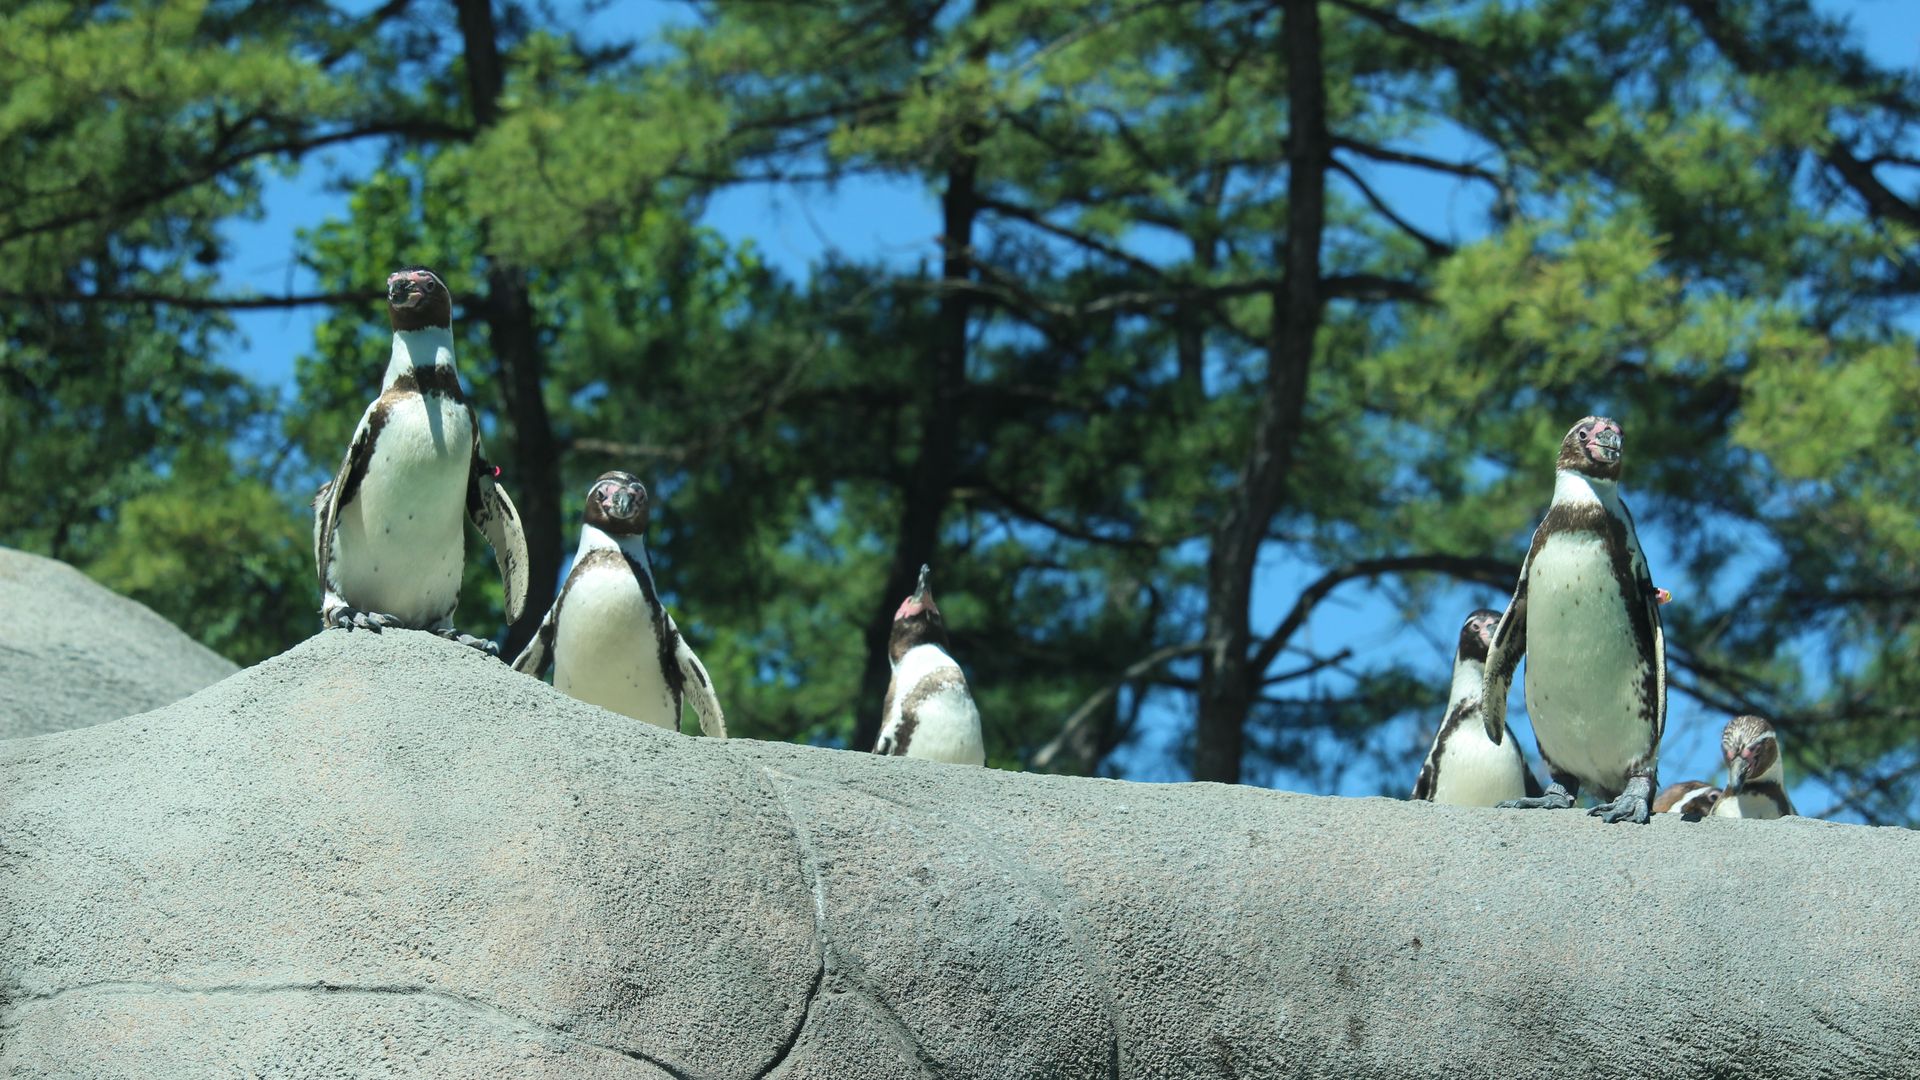 Penguins waddle in its exhibit at the Philadelphia Zoo 